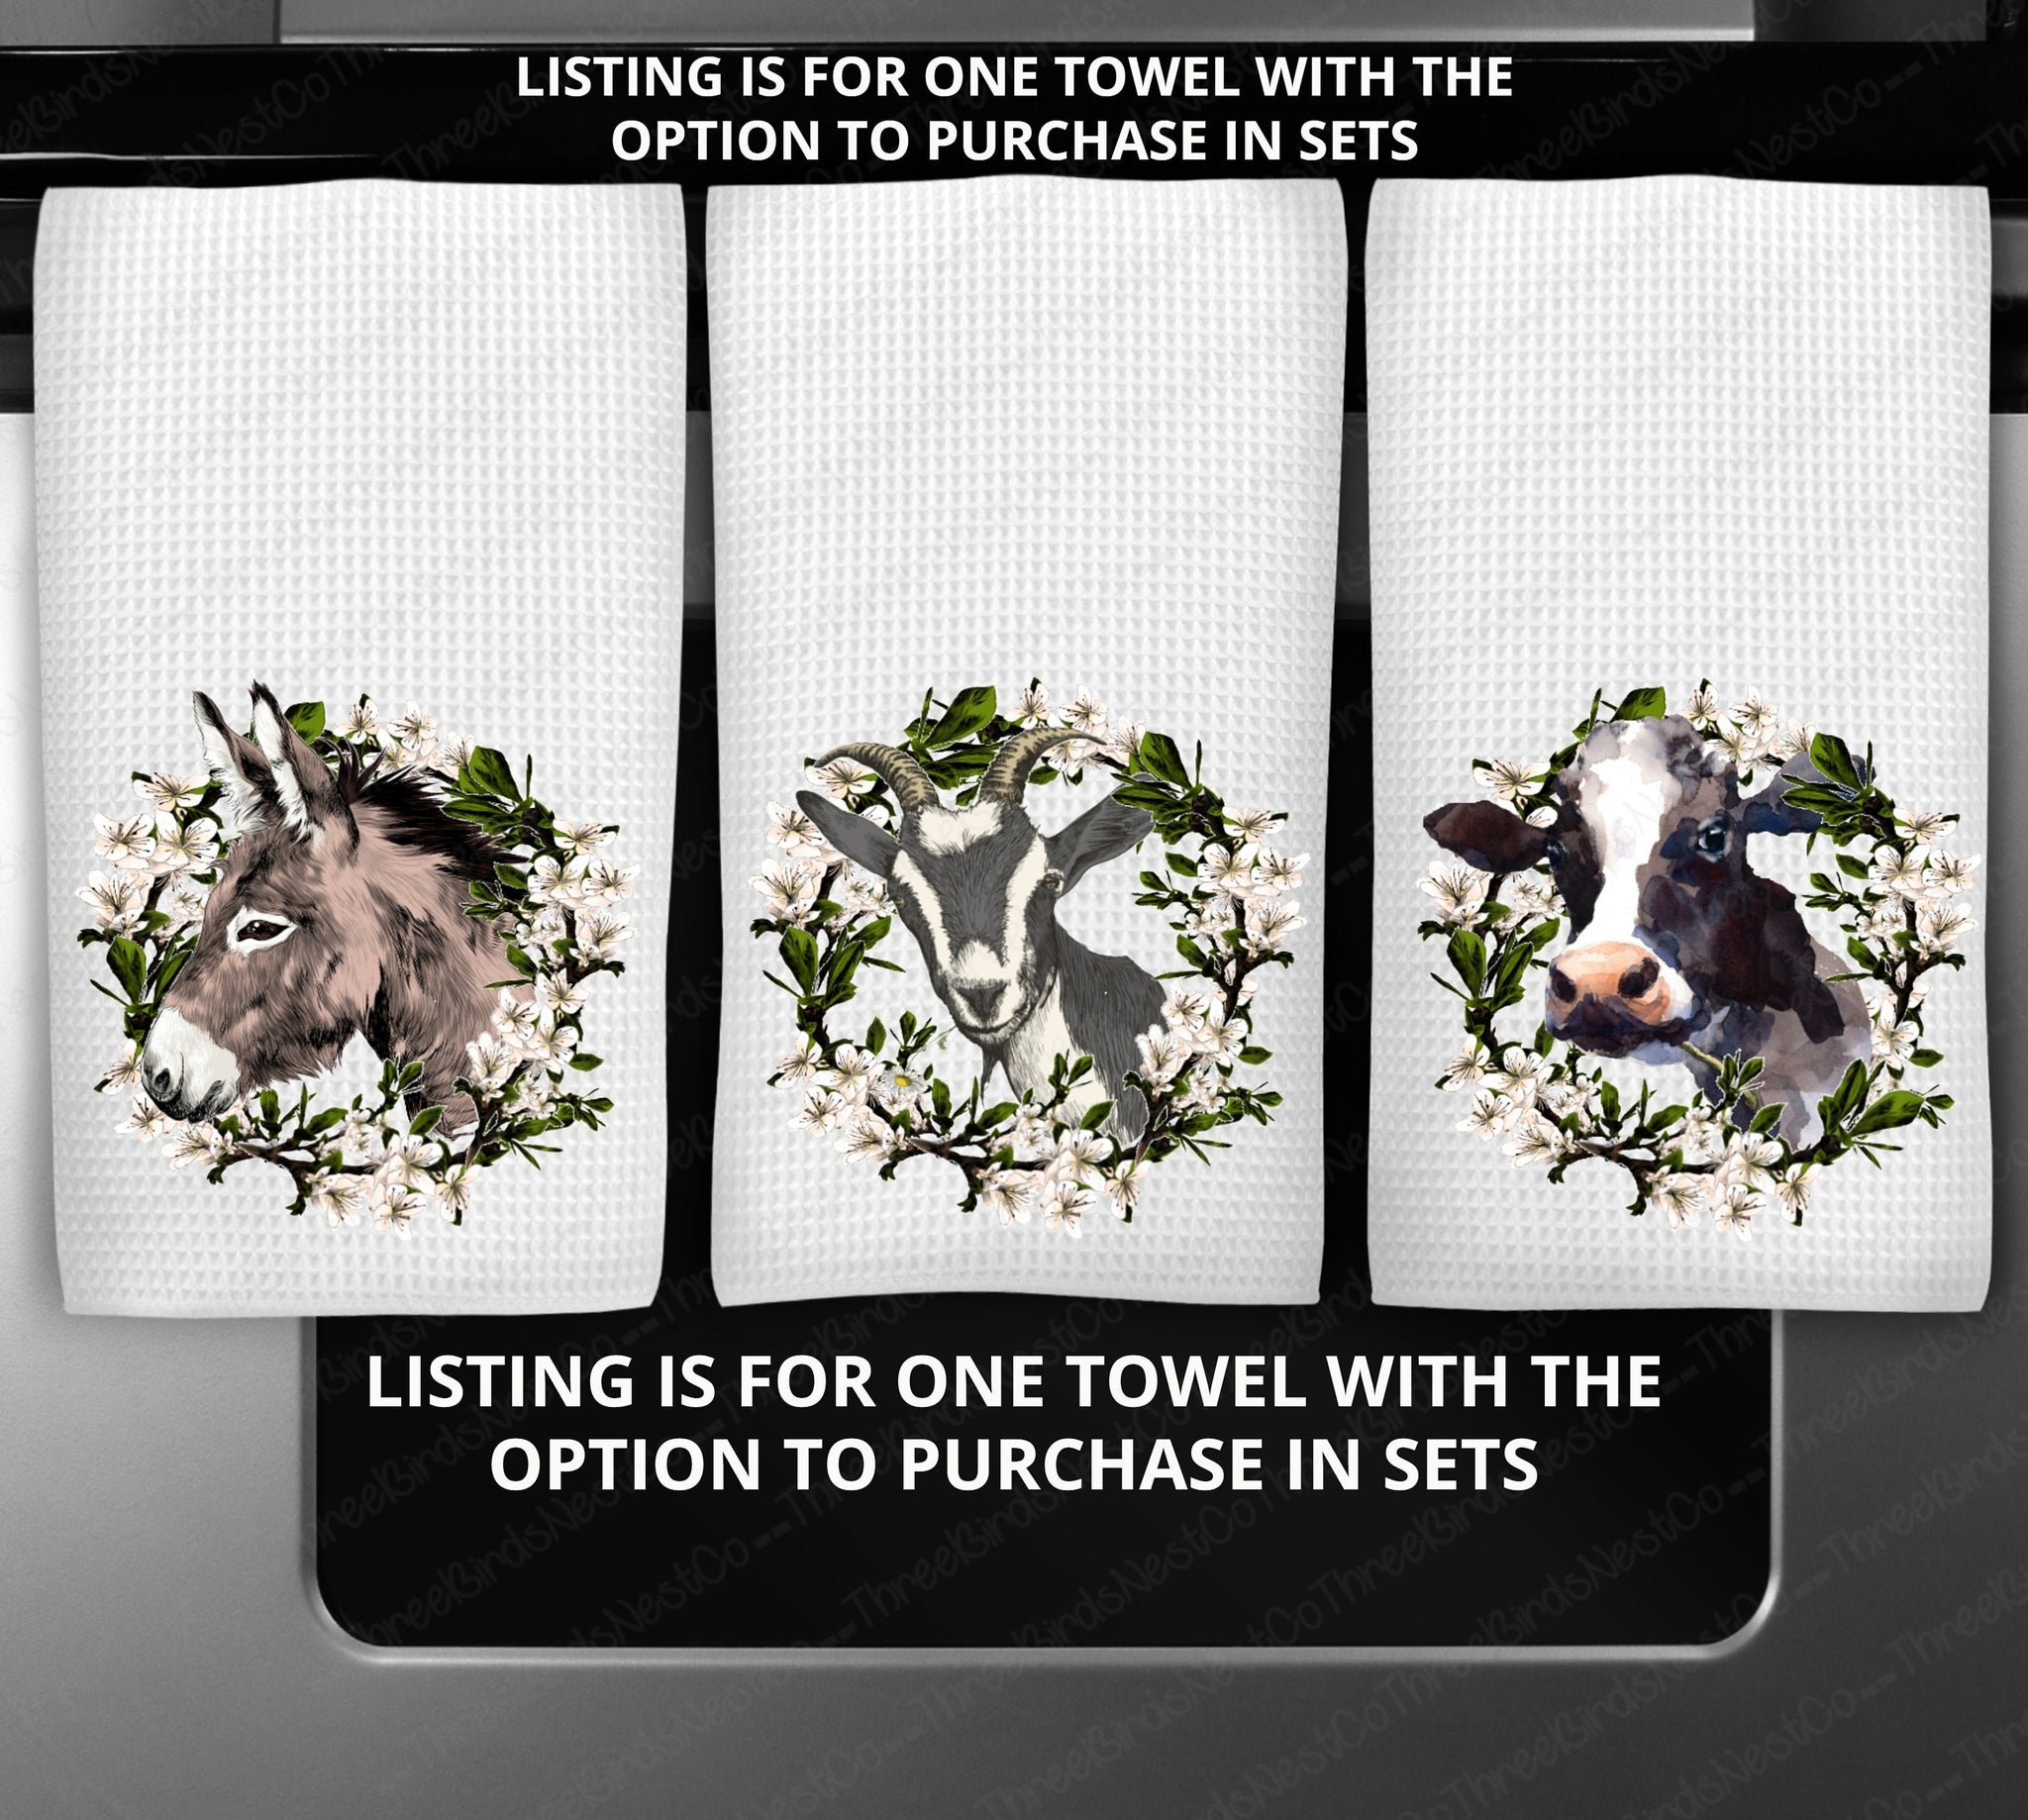 Cattle Brands Dish Towel